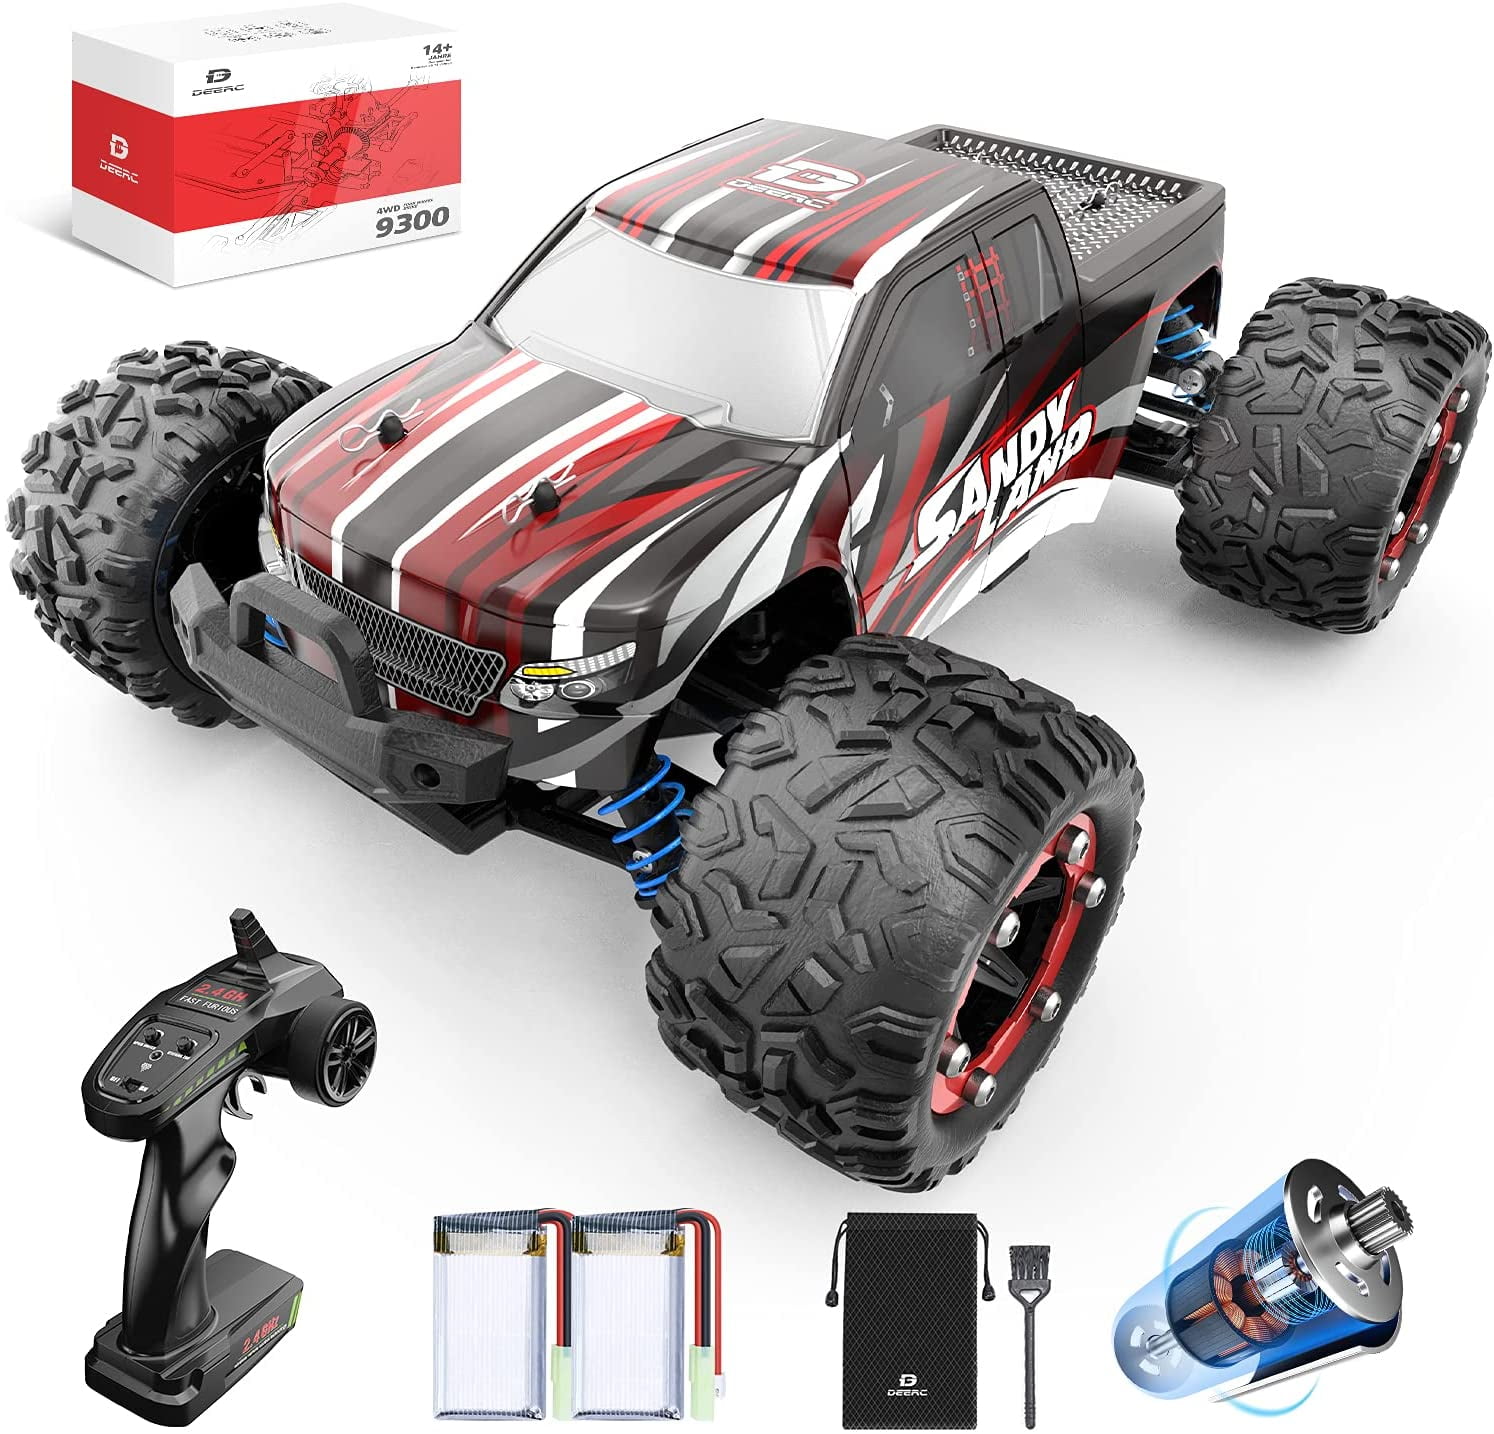 DEERC Brushless RC Cars High Speed Remote Control Car 4WD 35 MPH 1:18 Scale RC 